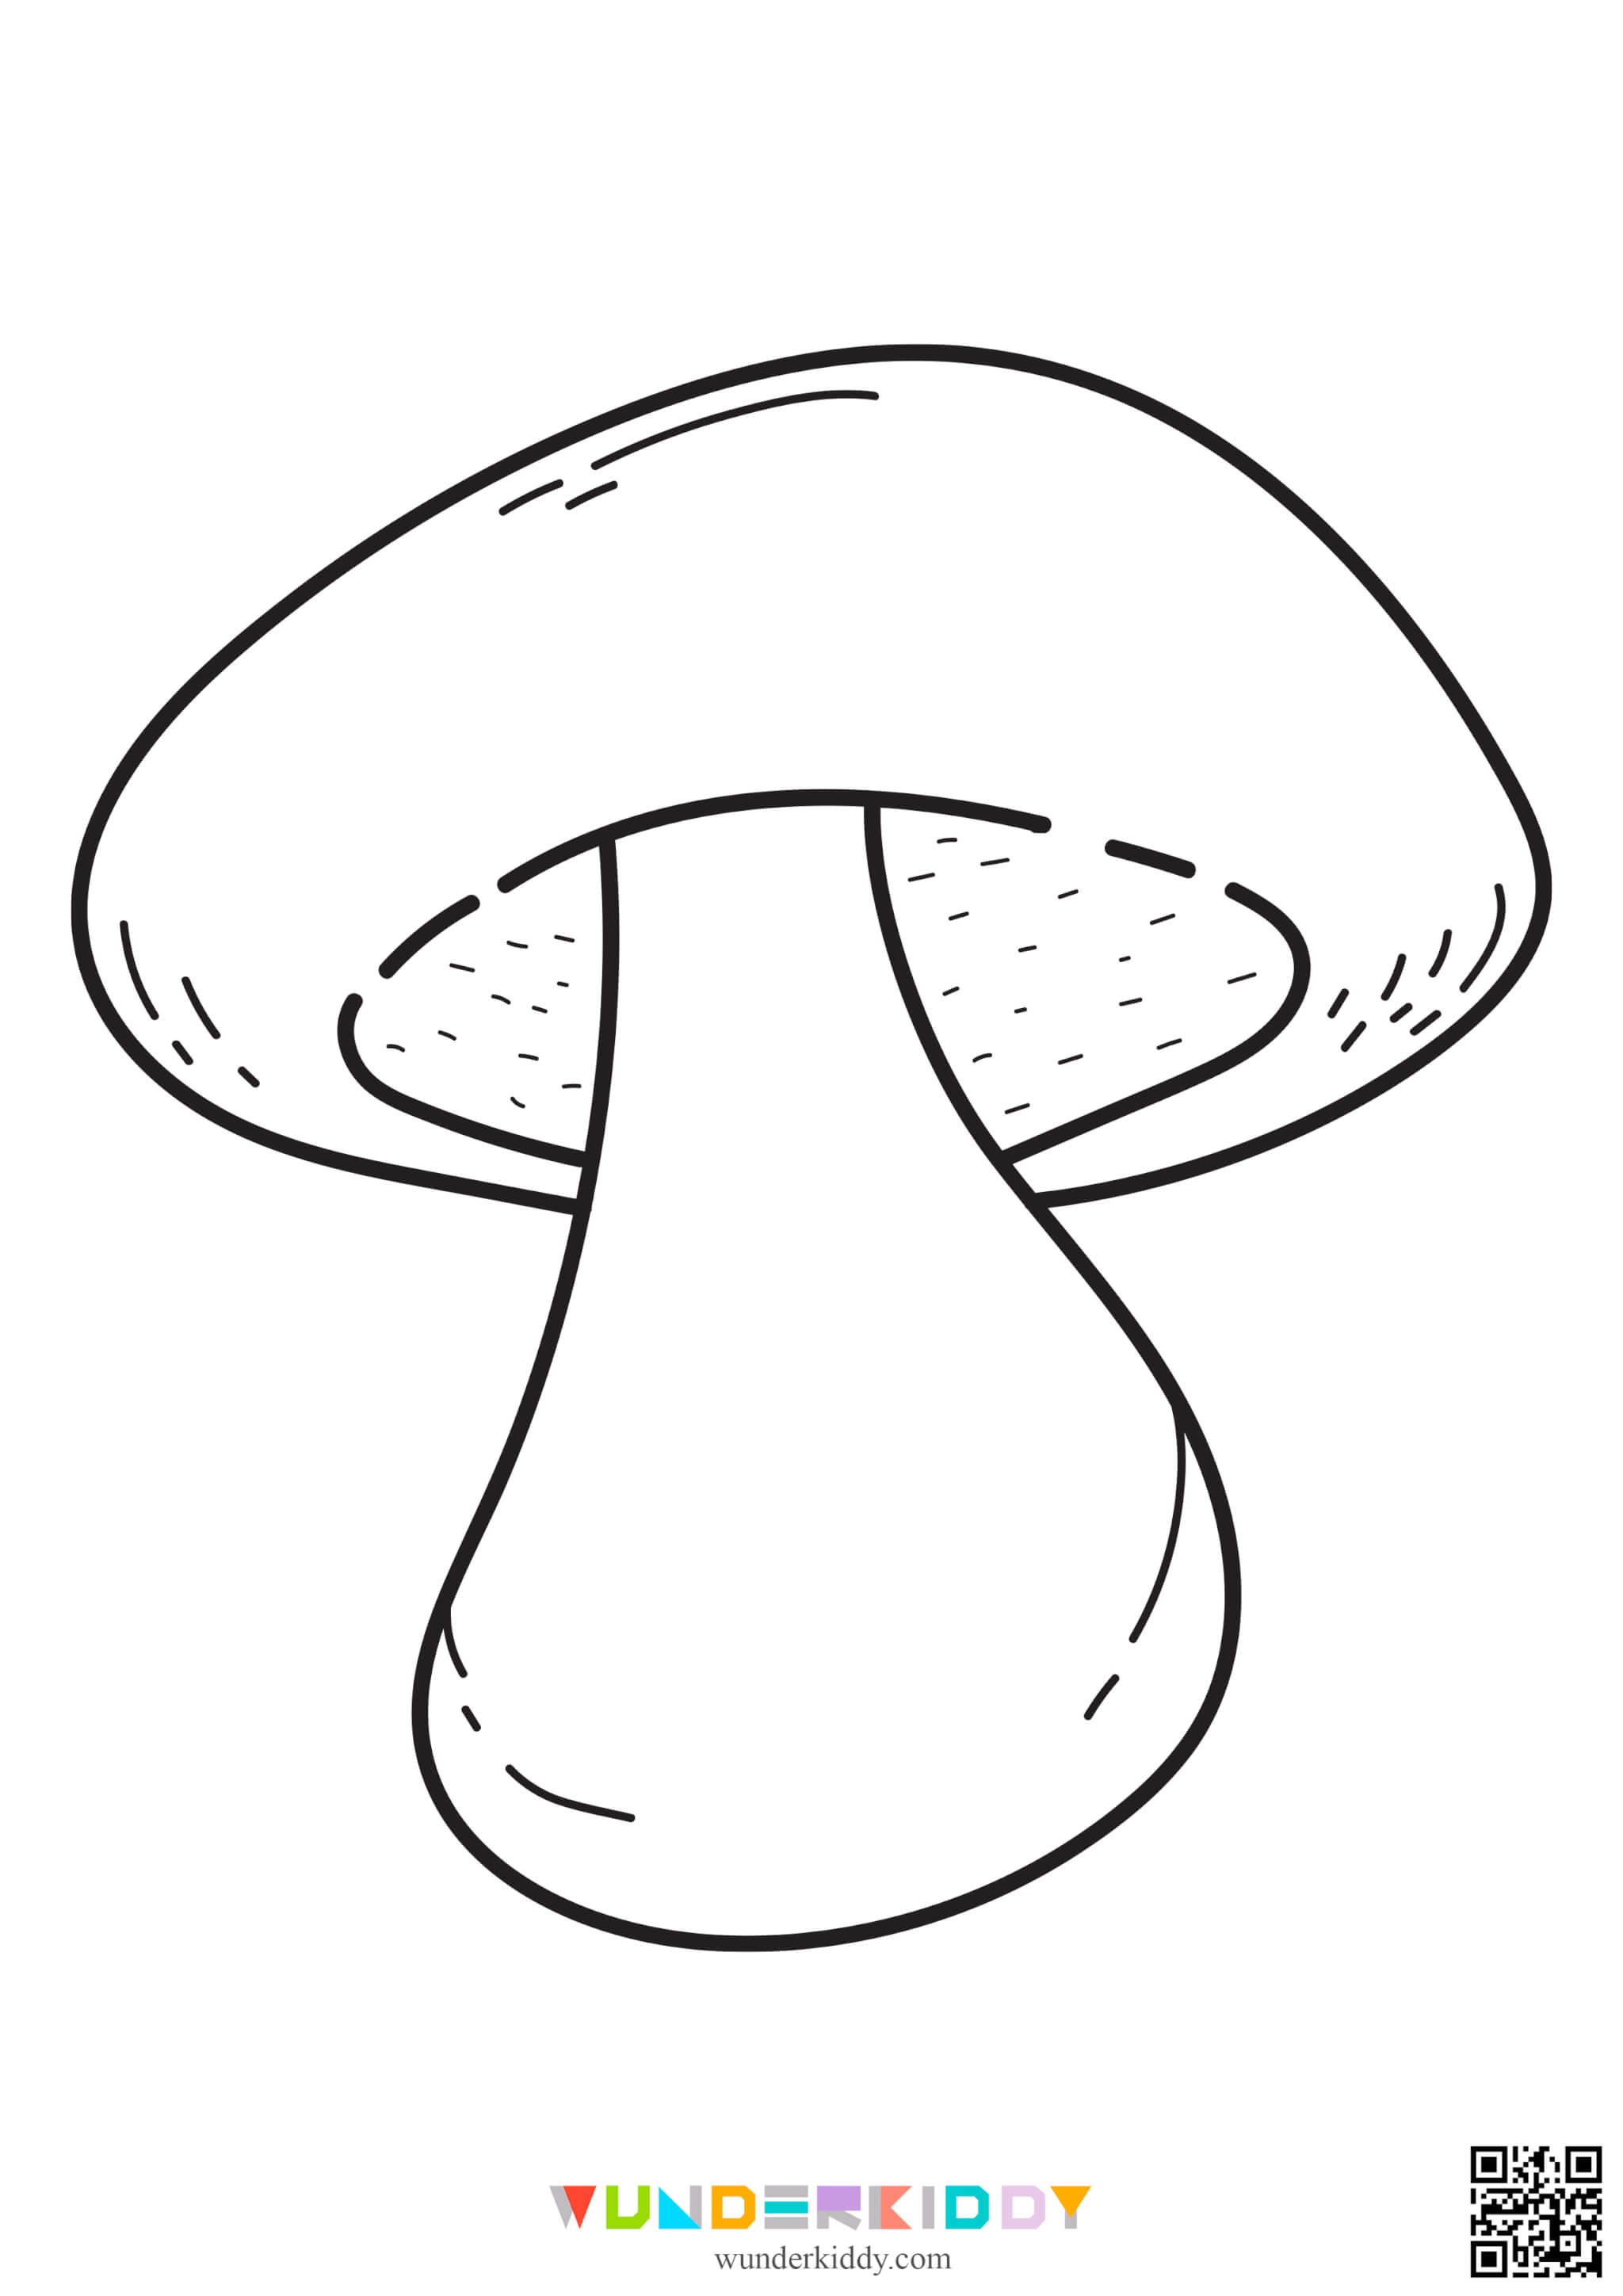 Coloring Pages of Mushrooms